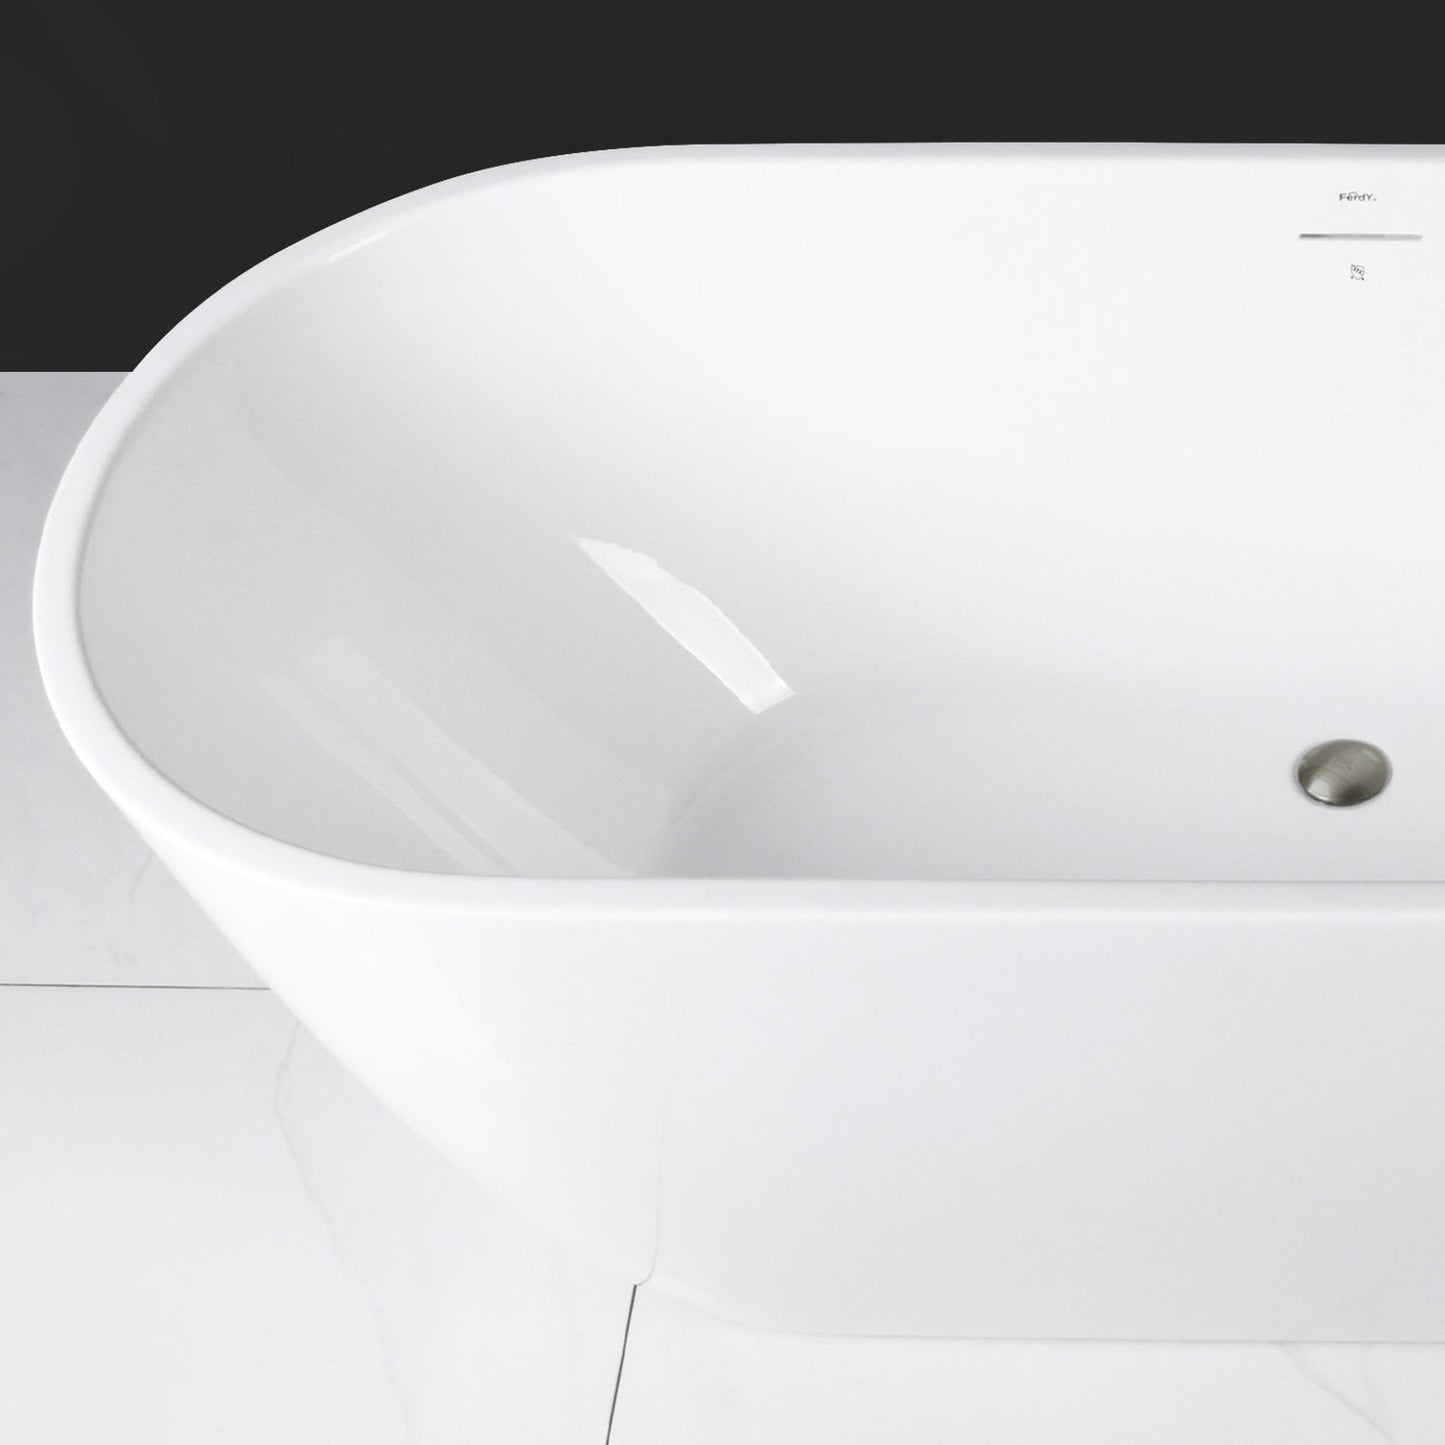 FerdY Bali 55" x 28" Oval Glossy White Acrylic Freestanding Roll Top Soaking Bathtub With Brushed Nickel Drain and Overflow